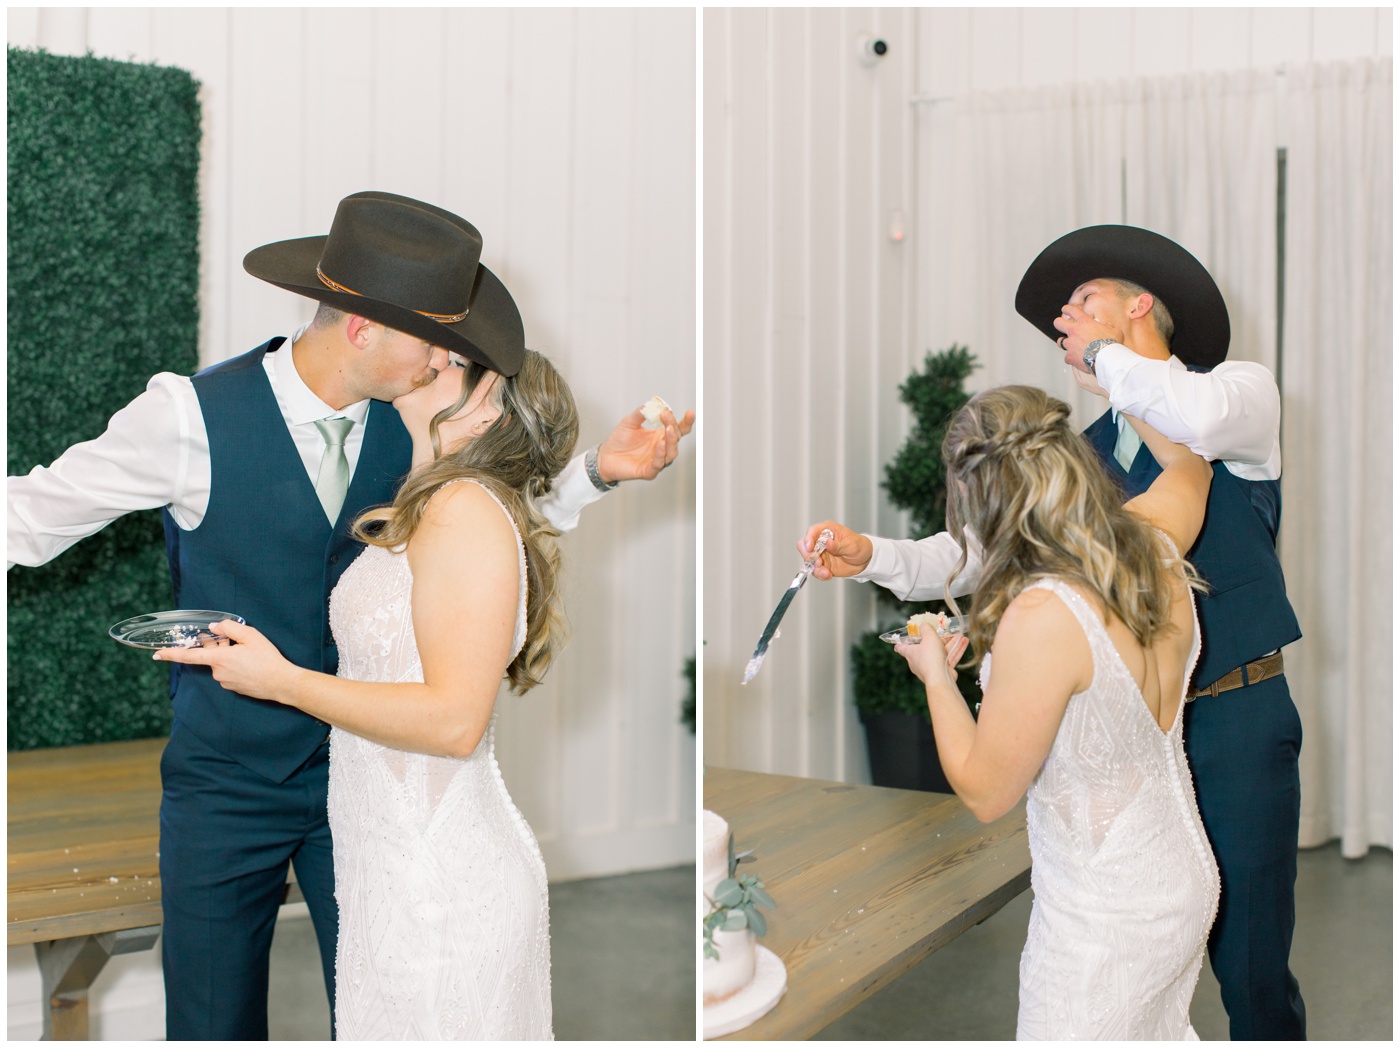 Texas farmhouse wedding | the bride and groom laugh as the bride shoves cake in the groom's face 